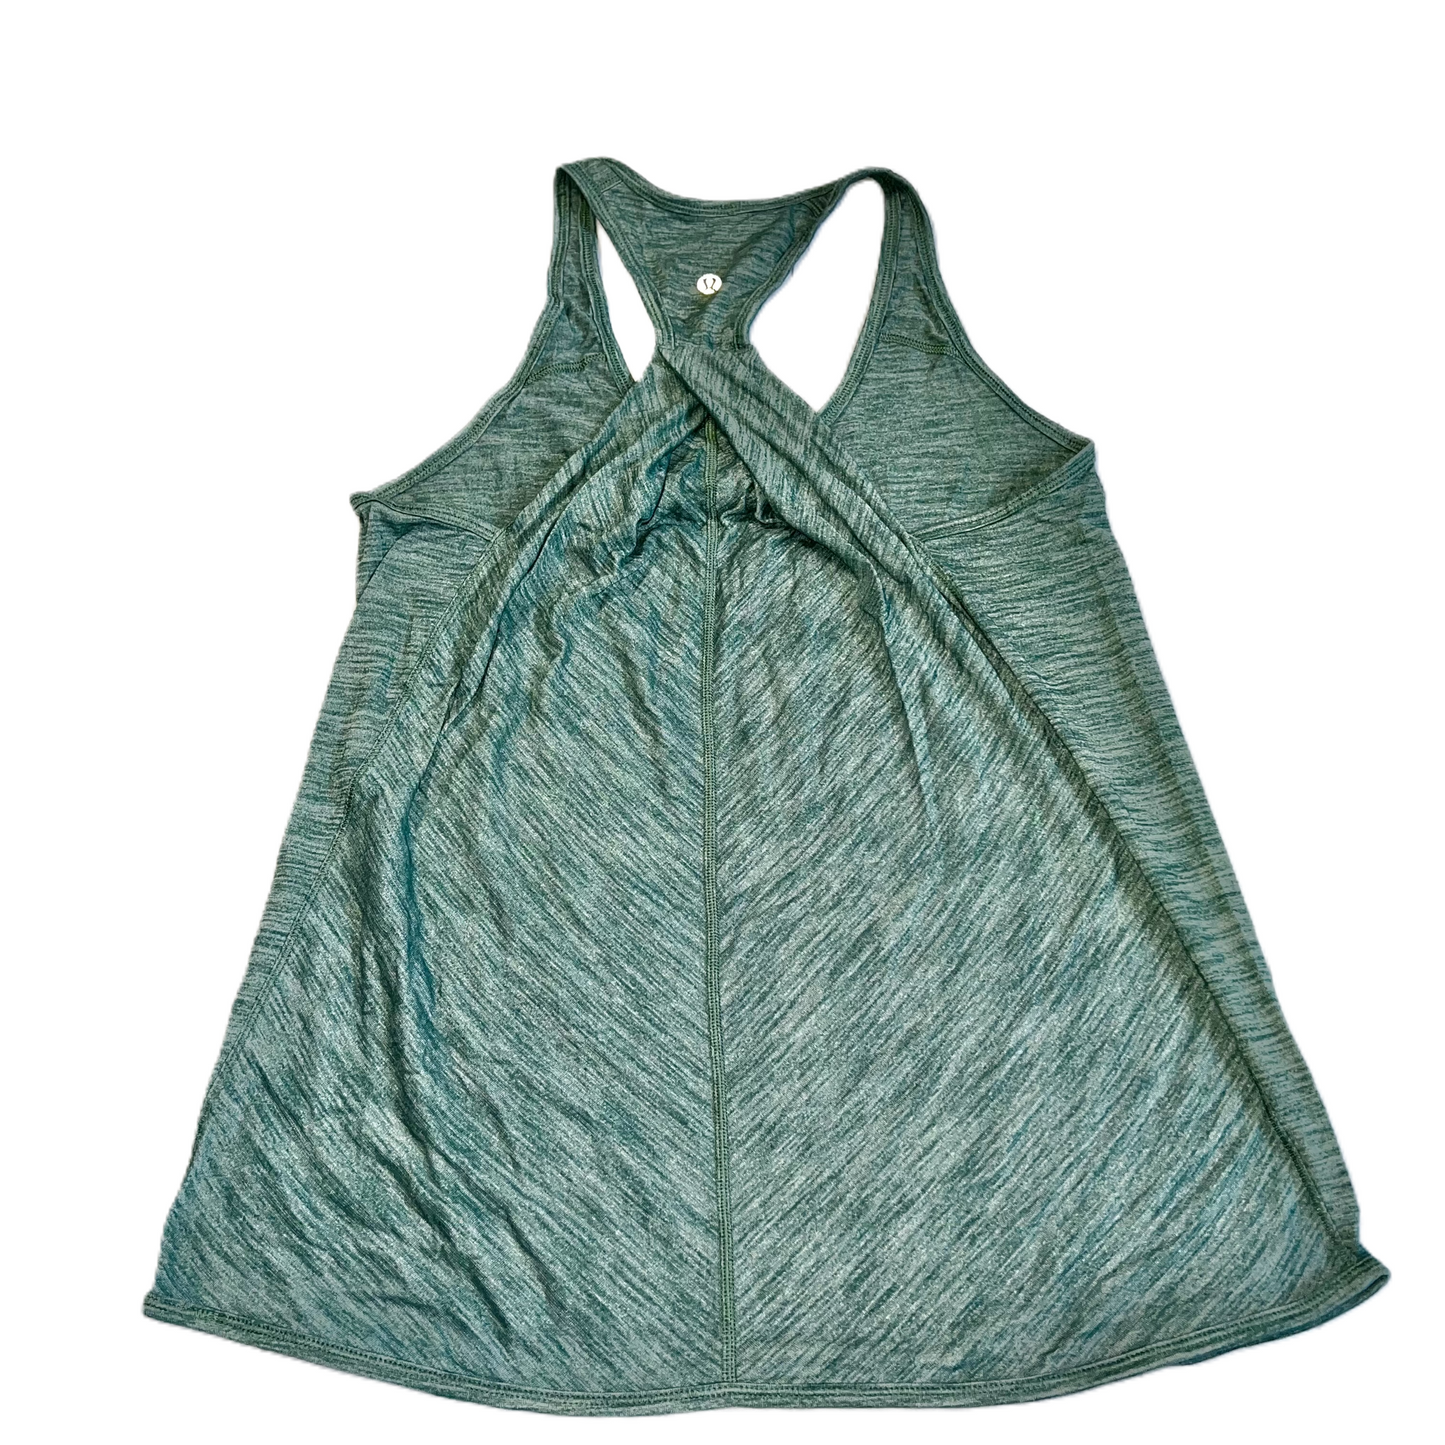 Teal Athletic Tank Top By Lululemon, Size: S